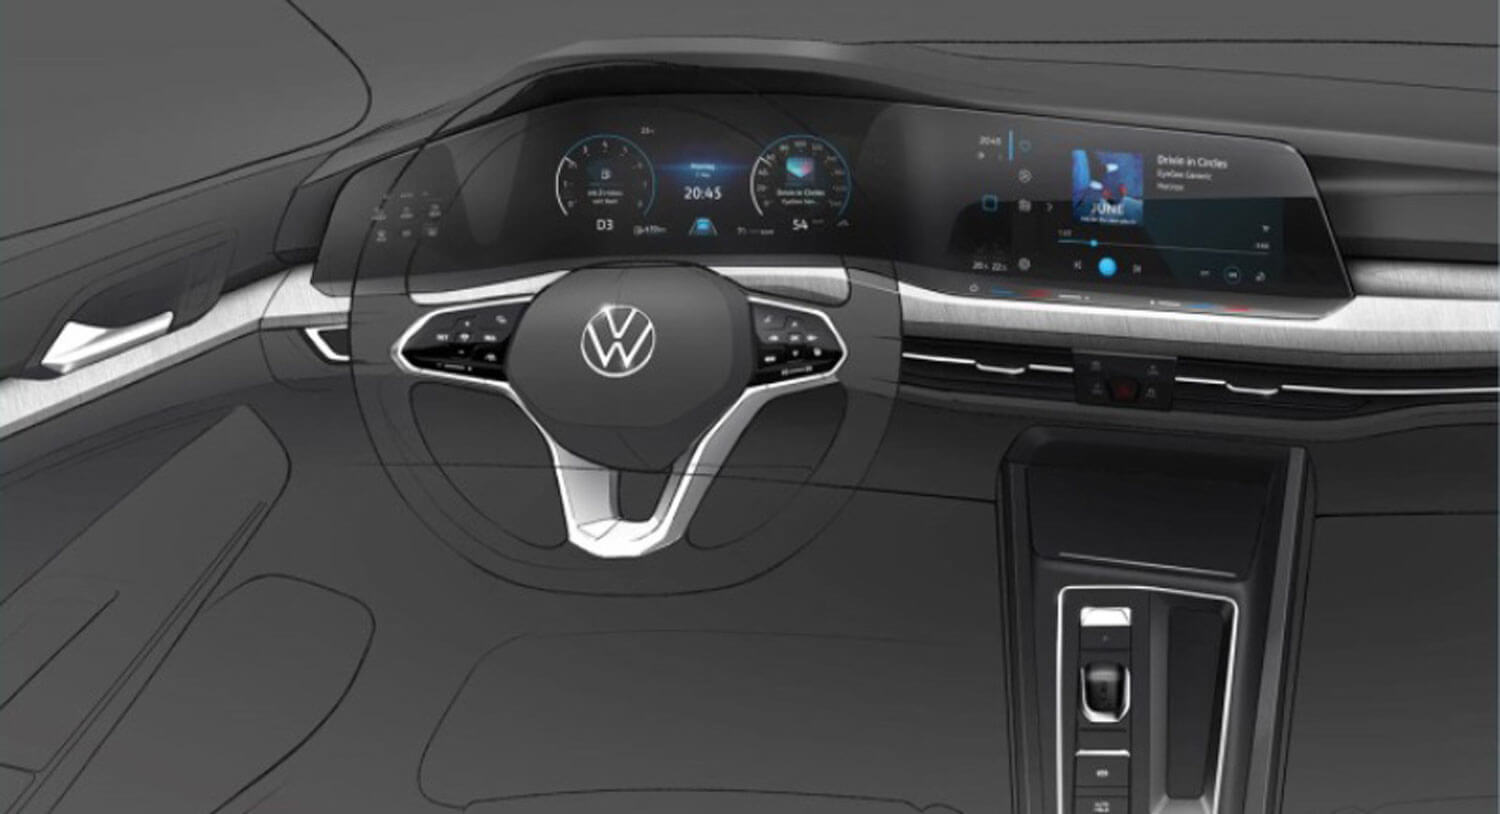 2020 Vw Golf 8 Interior And Exterior Sketches Are Very